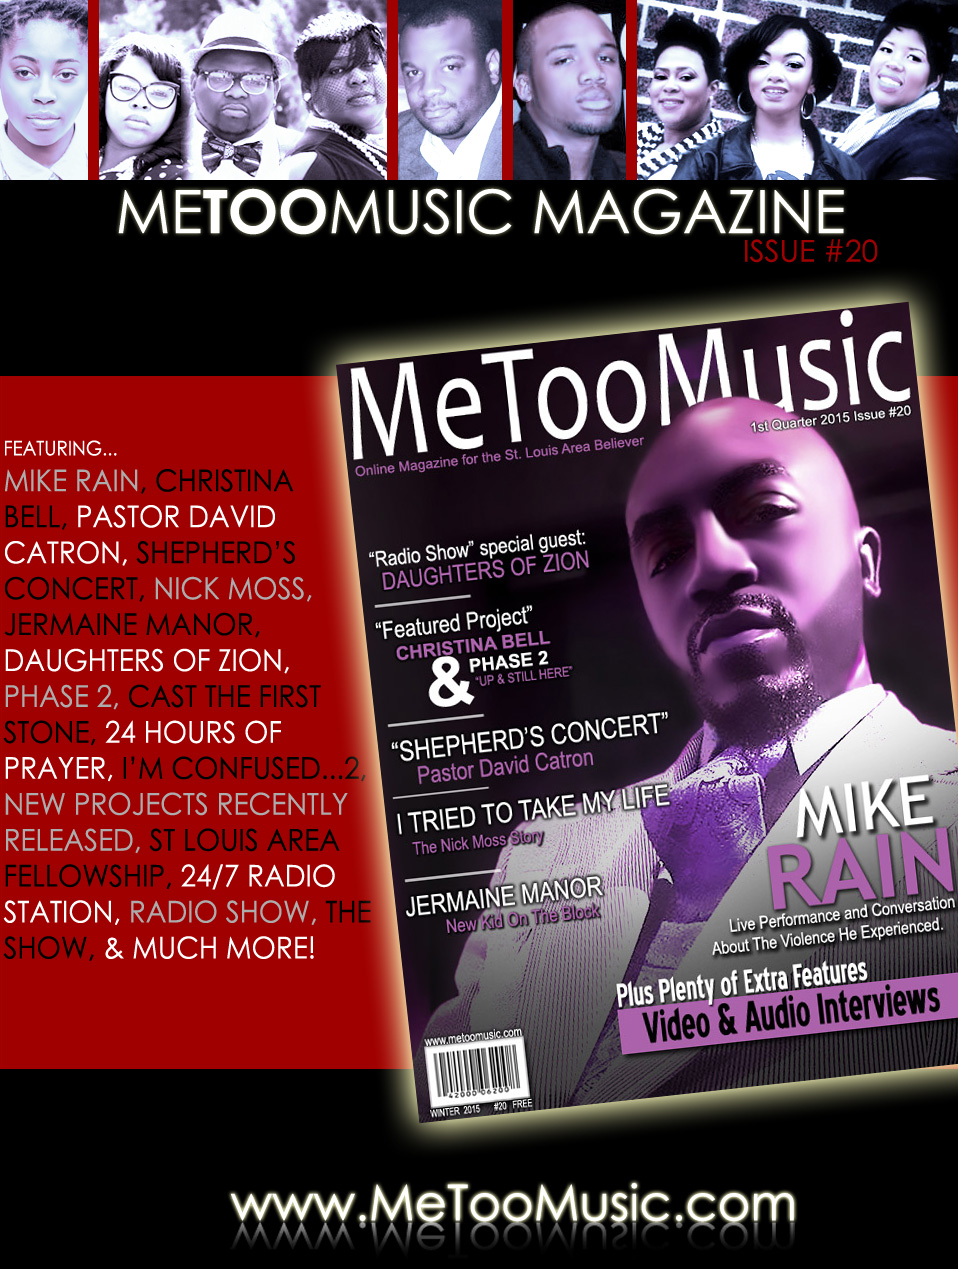 magazine_front_page_issue_20.jpg